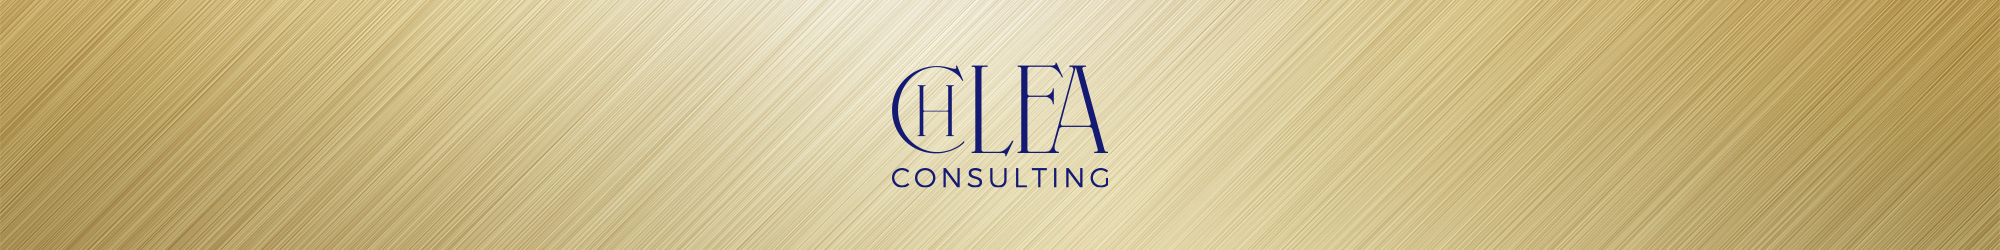 Chléa Consulting